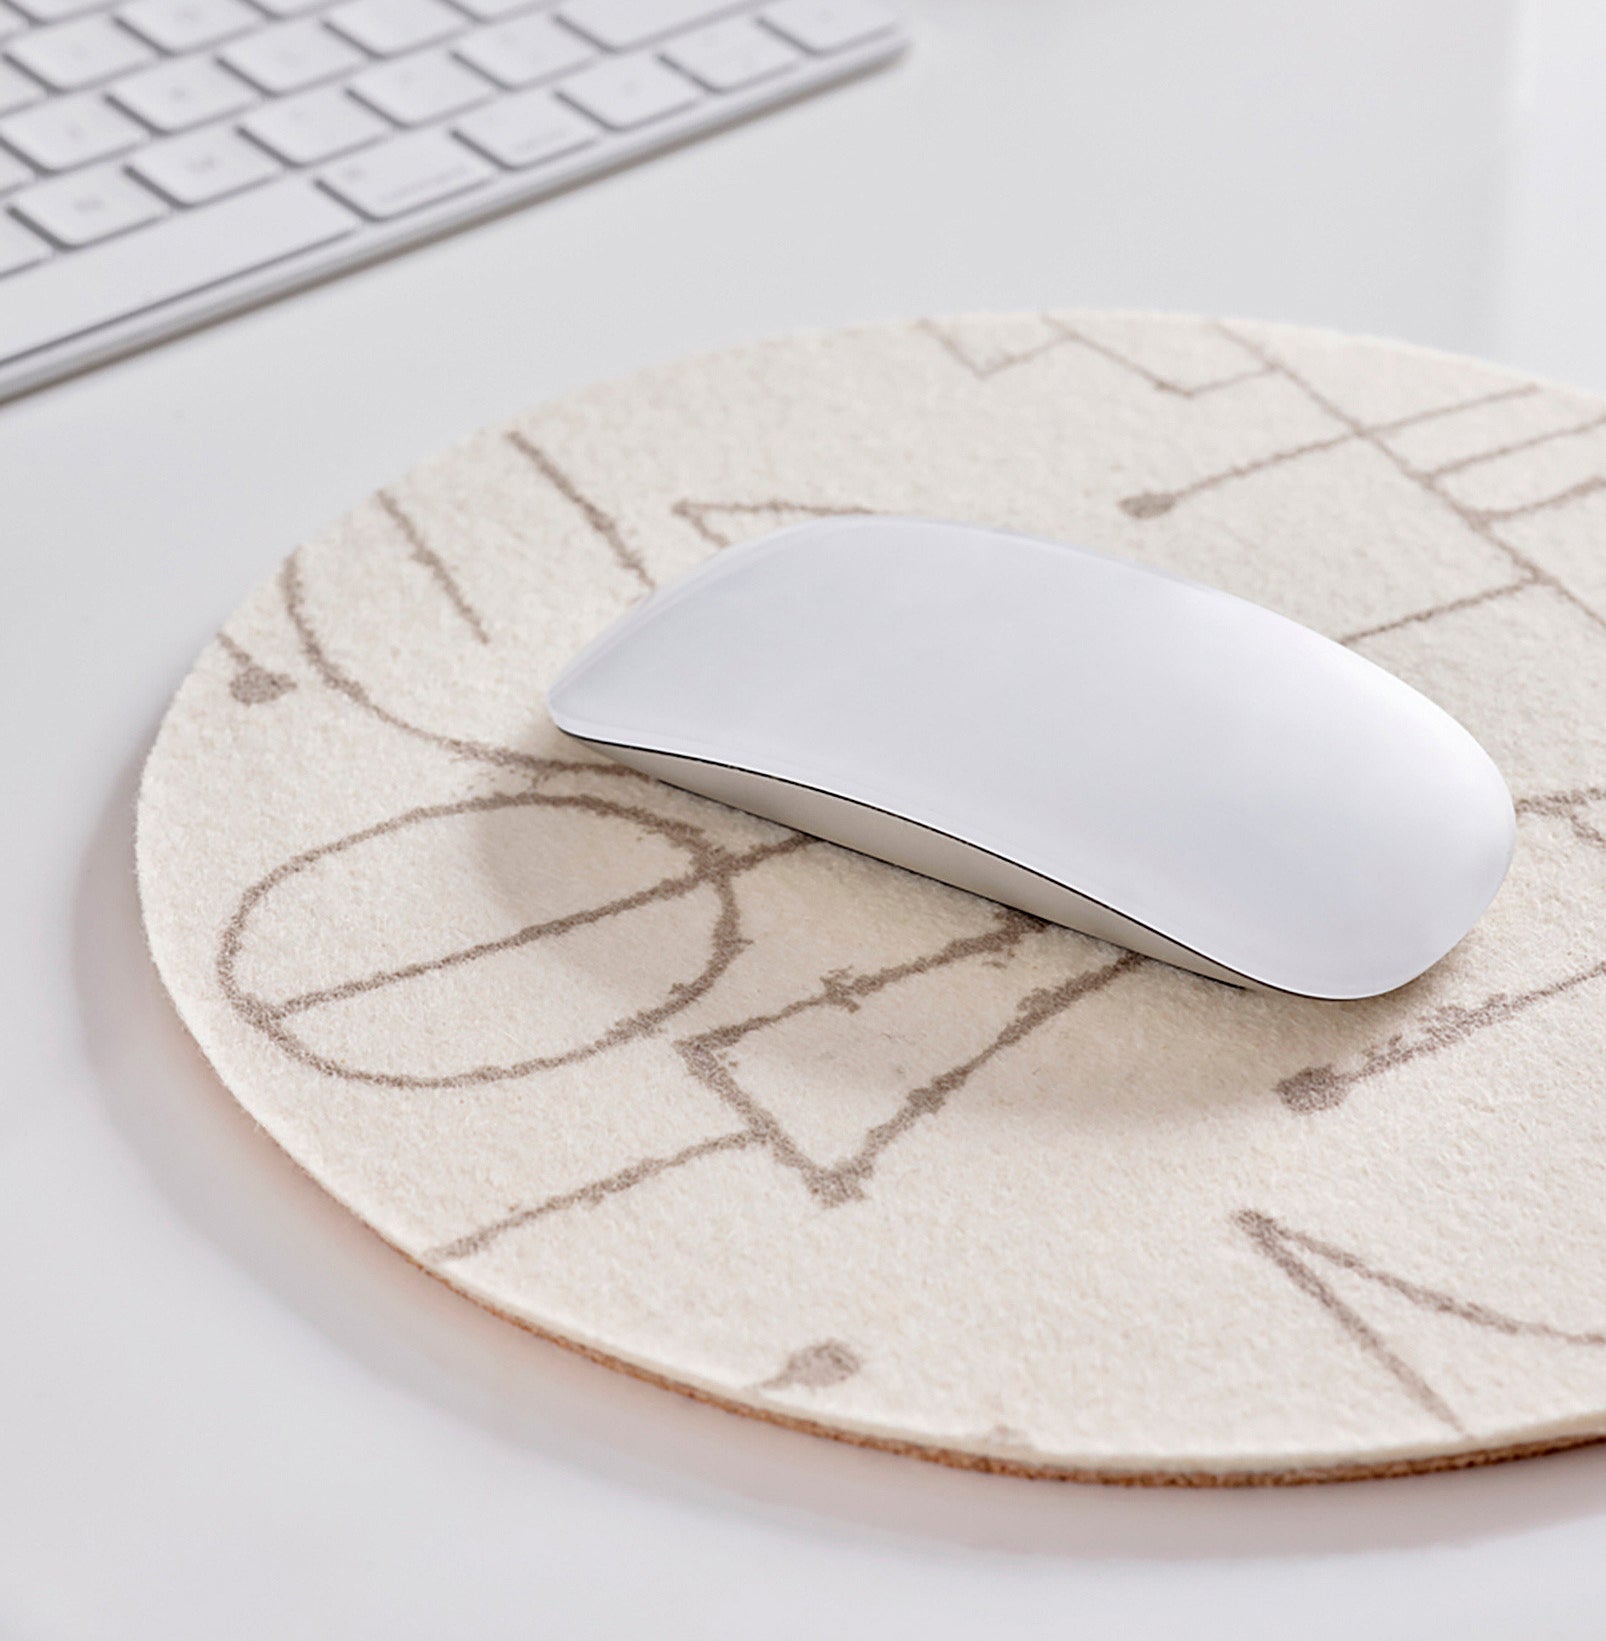 A sleek mouse on the round mouse pad 